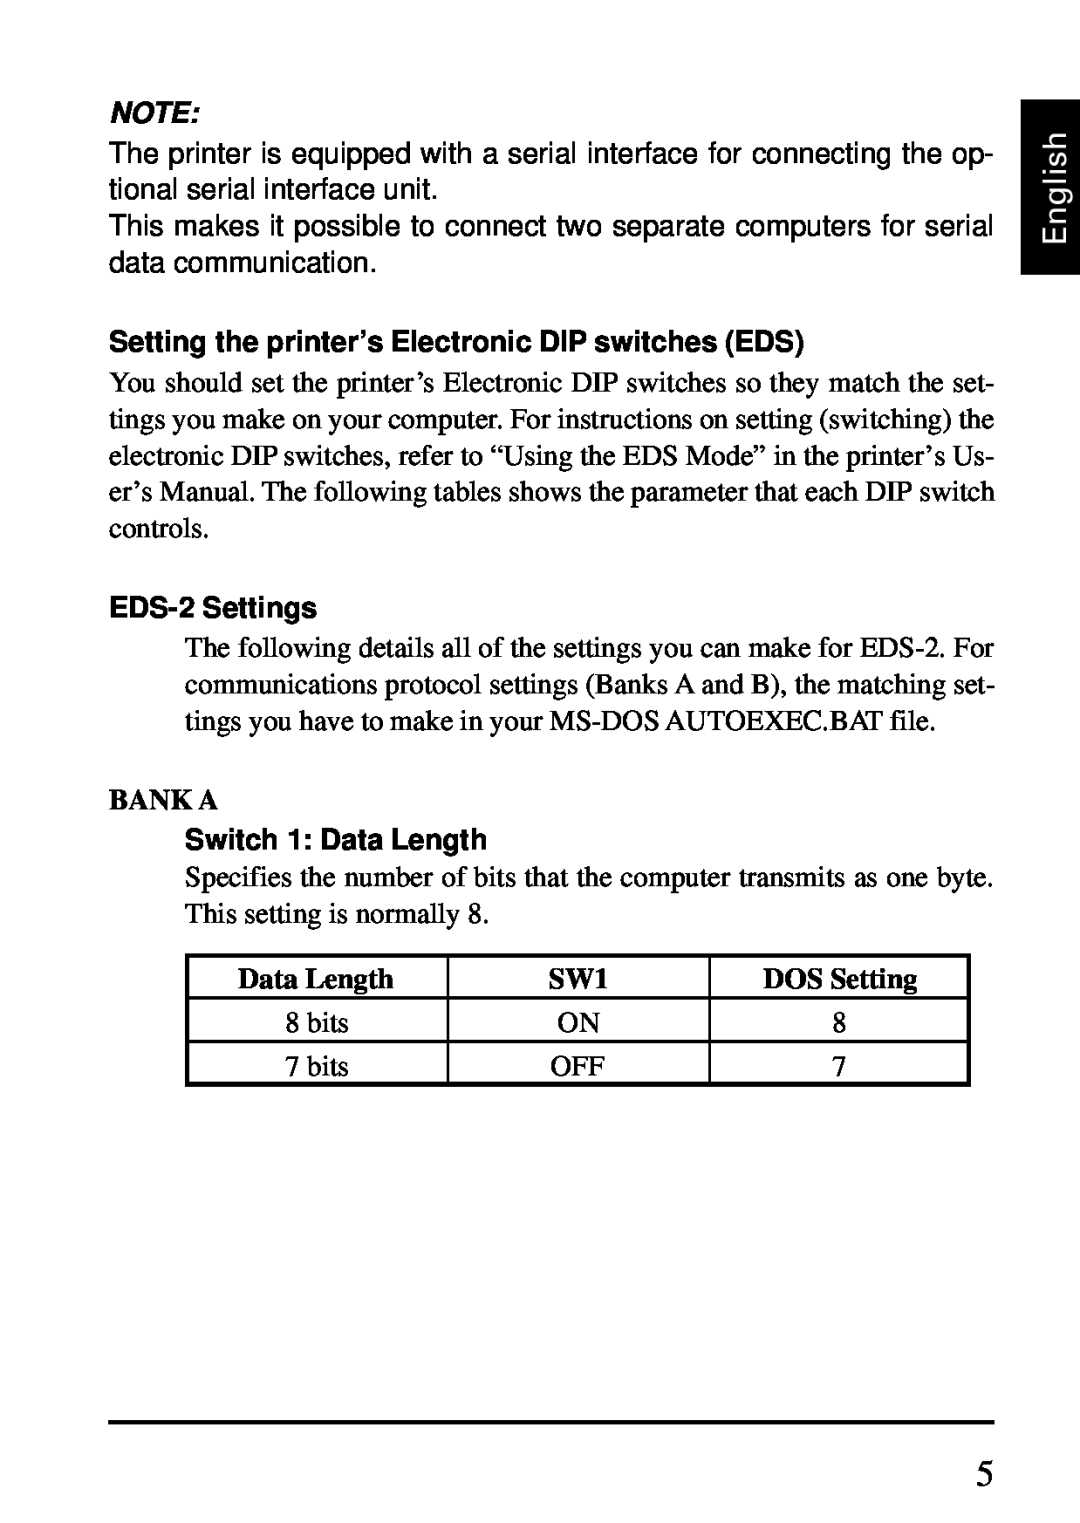 Star Micronics IS-NP192 Setting the printer’s Electronic DIP switches EDS, EDS-2 Settings, Bank A, Switch 1 Data Length 